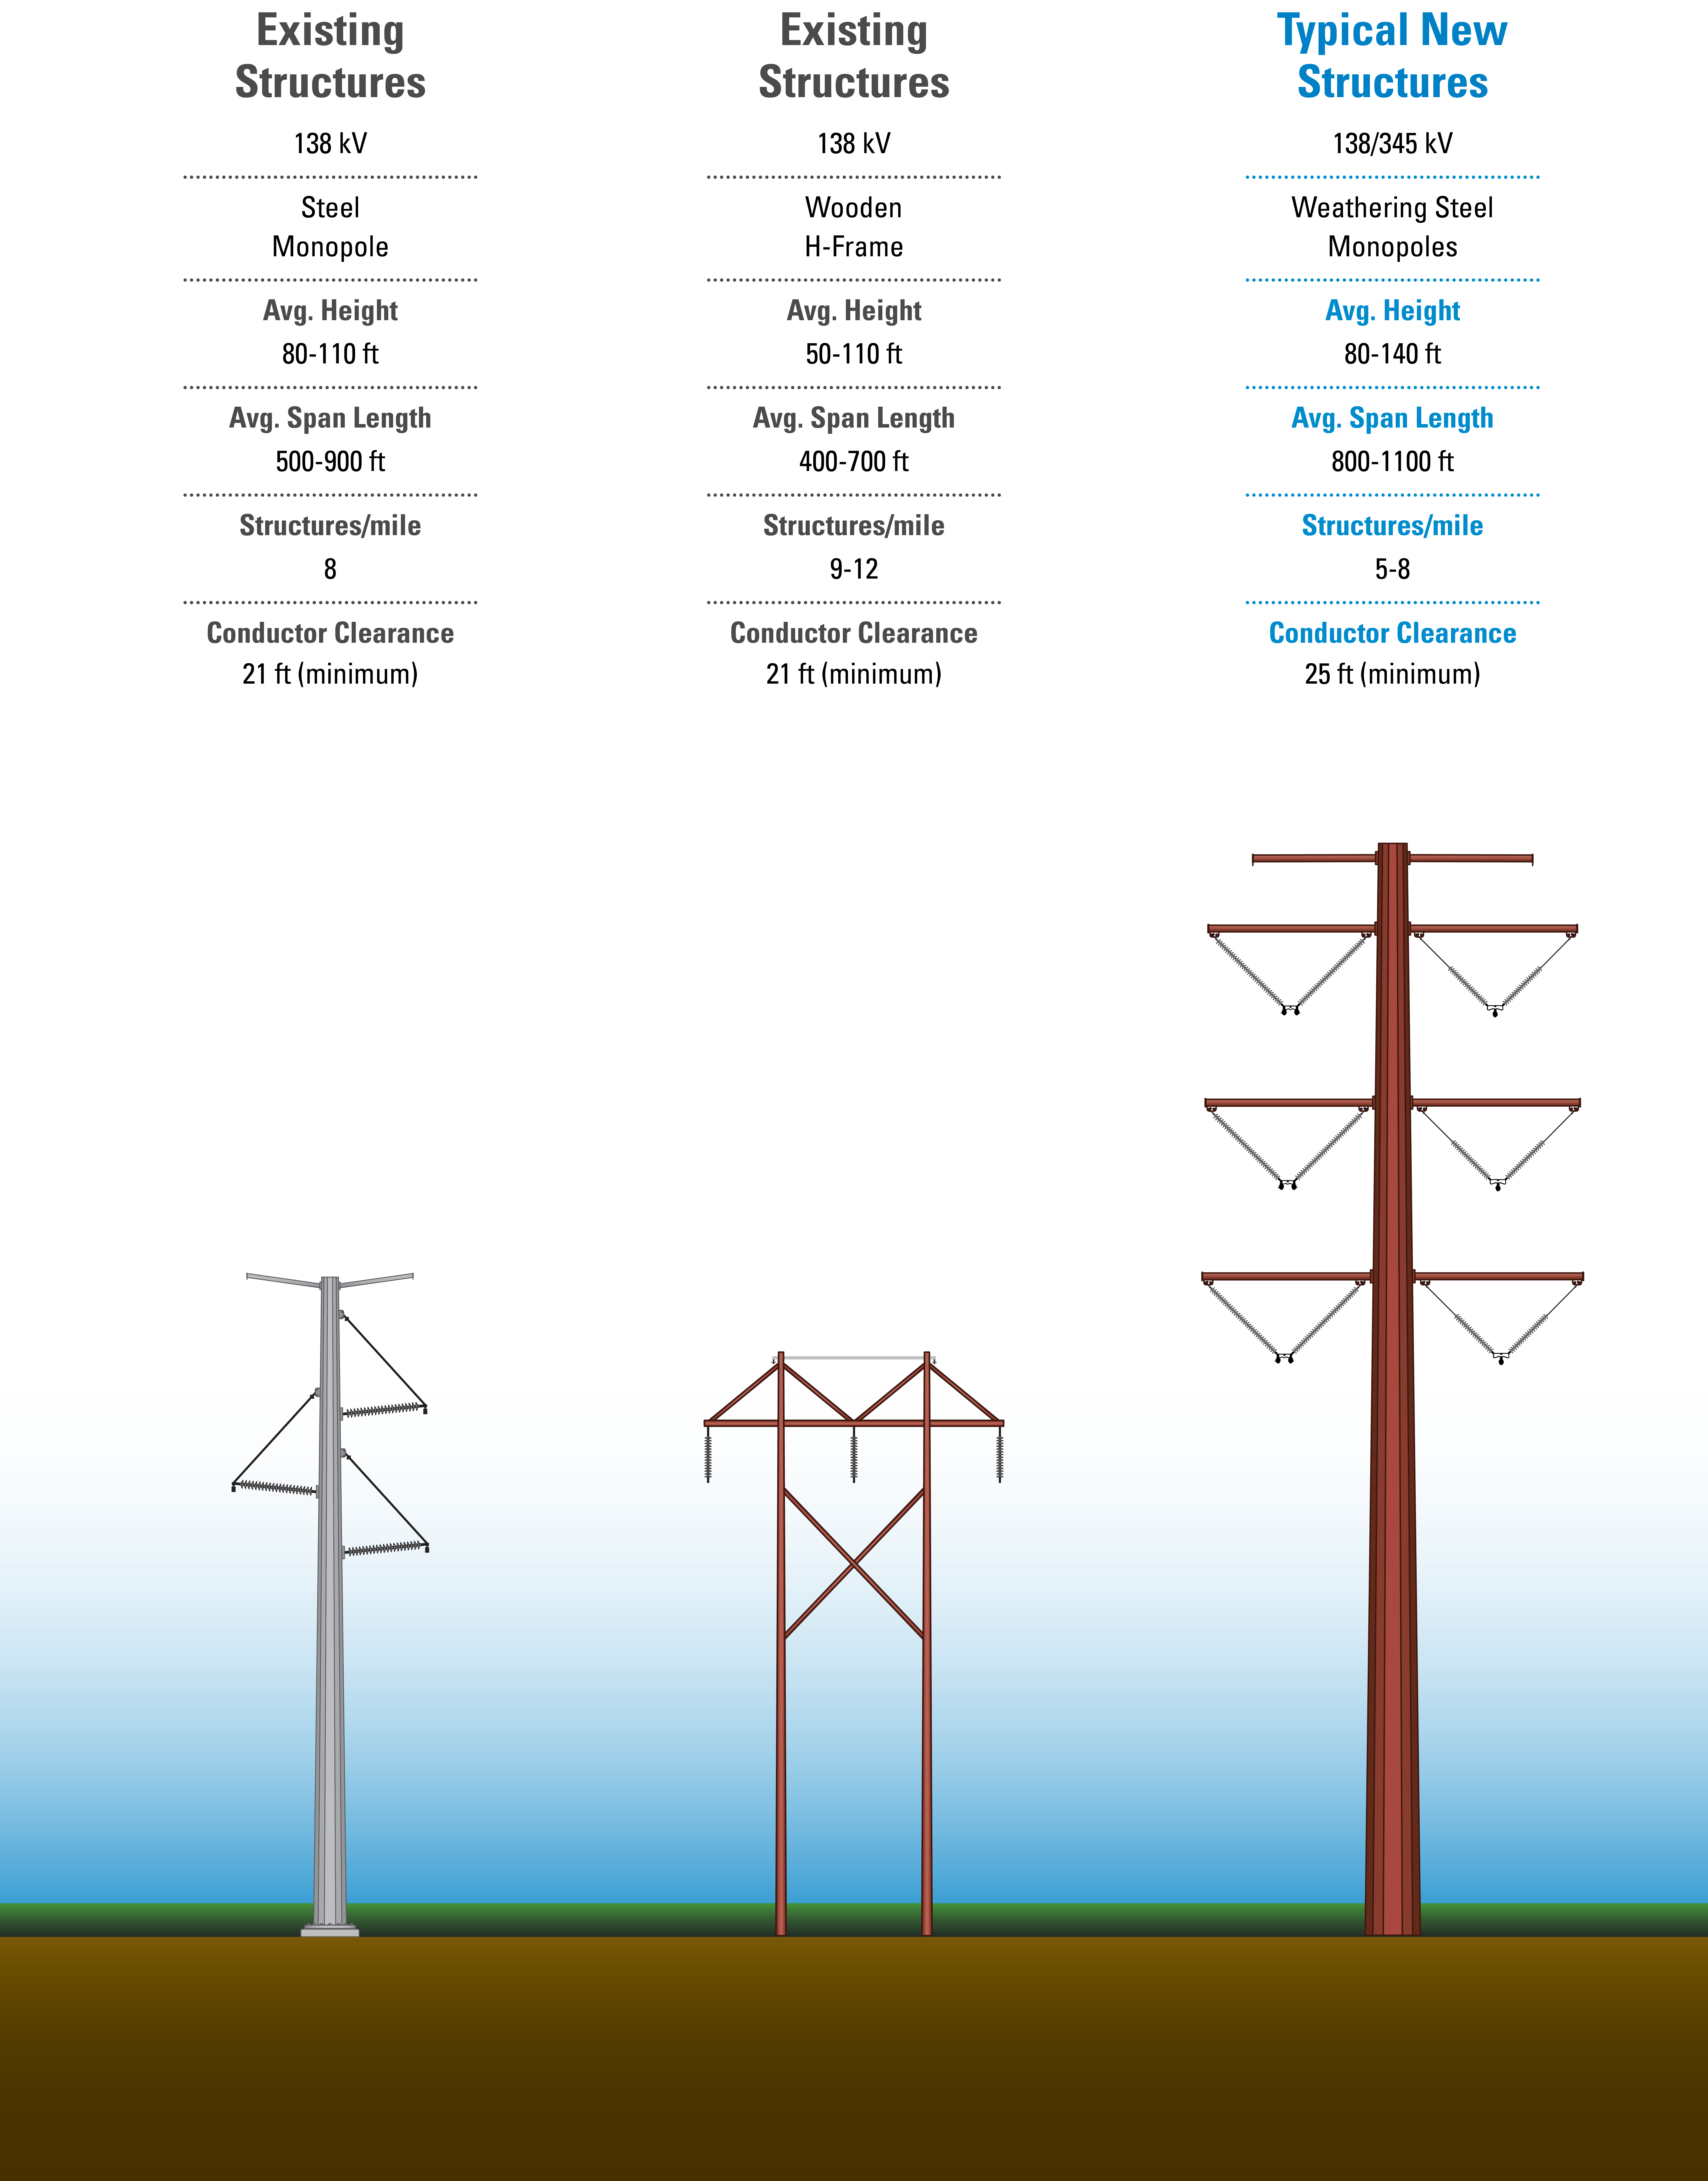 Three side by side structure graphics showing the existing structures and anticipated new structures for the county. Graphics are intended for information purposes only and are not to scale. New structure designs, including number of arms and type of foundation may vary depending on final route, soil conditions, circuit design, and presence of distribution.
                                                  Graphic 1 showcases the existing 138 kV steel monopole, with an average height of 80-110ft and average span length between 500-900ft. Structures per mile averages between 8 miles with a conductor clearance of 21ft minimum. 
                                                  
                                                  Graphic 2 shows the existing 138 kV wooden H-frame, with an average height of 50-110ft and average span length between 400-700ft. Structures per mile averages between 9-12 miles with a conductor clearance of 21ft minimum. 
                                                  
                                                  Graphic 3 shows the anticipated new structure as a 138/345 kV weathering steel monopole with an average height of 80-140ft and average span length between 800-1100 ft. Structures per mile averages between 5-8 miles with a conductor clearance of 25ft minimum.